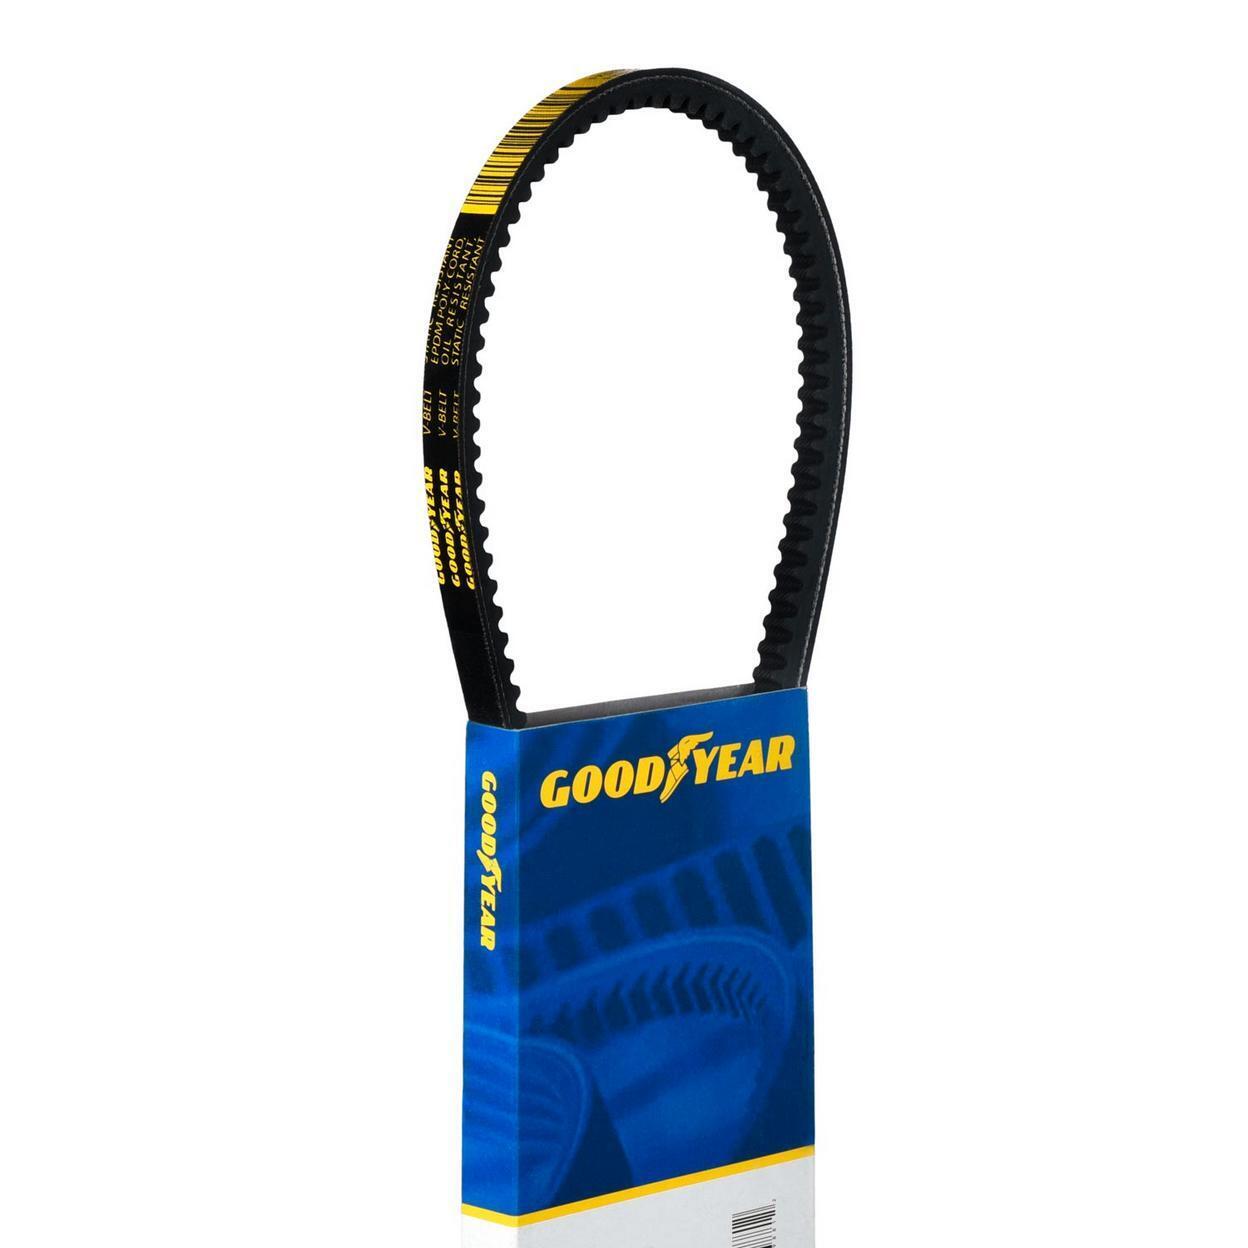 Goodyear Accessory Drive Belt for 1988-1989 Yugo GVL Water Pump and Air Pump